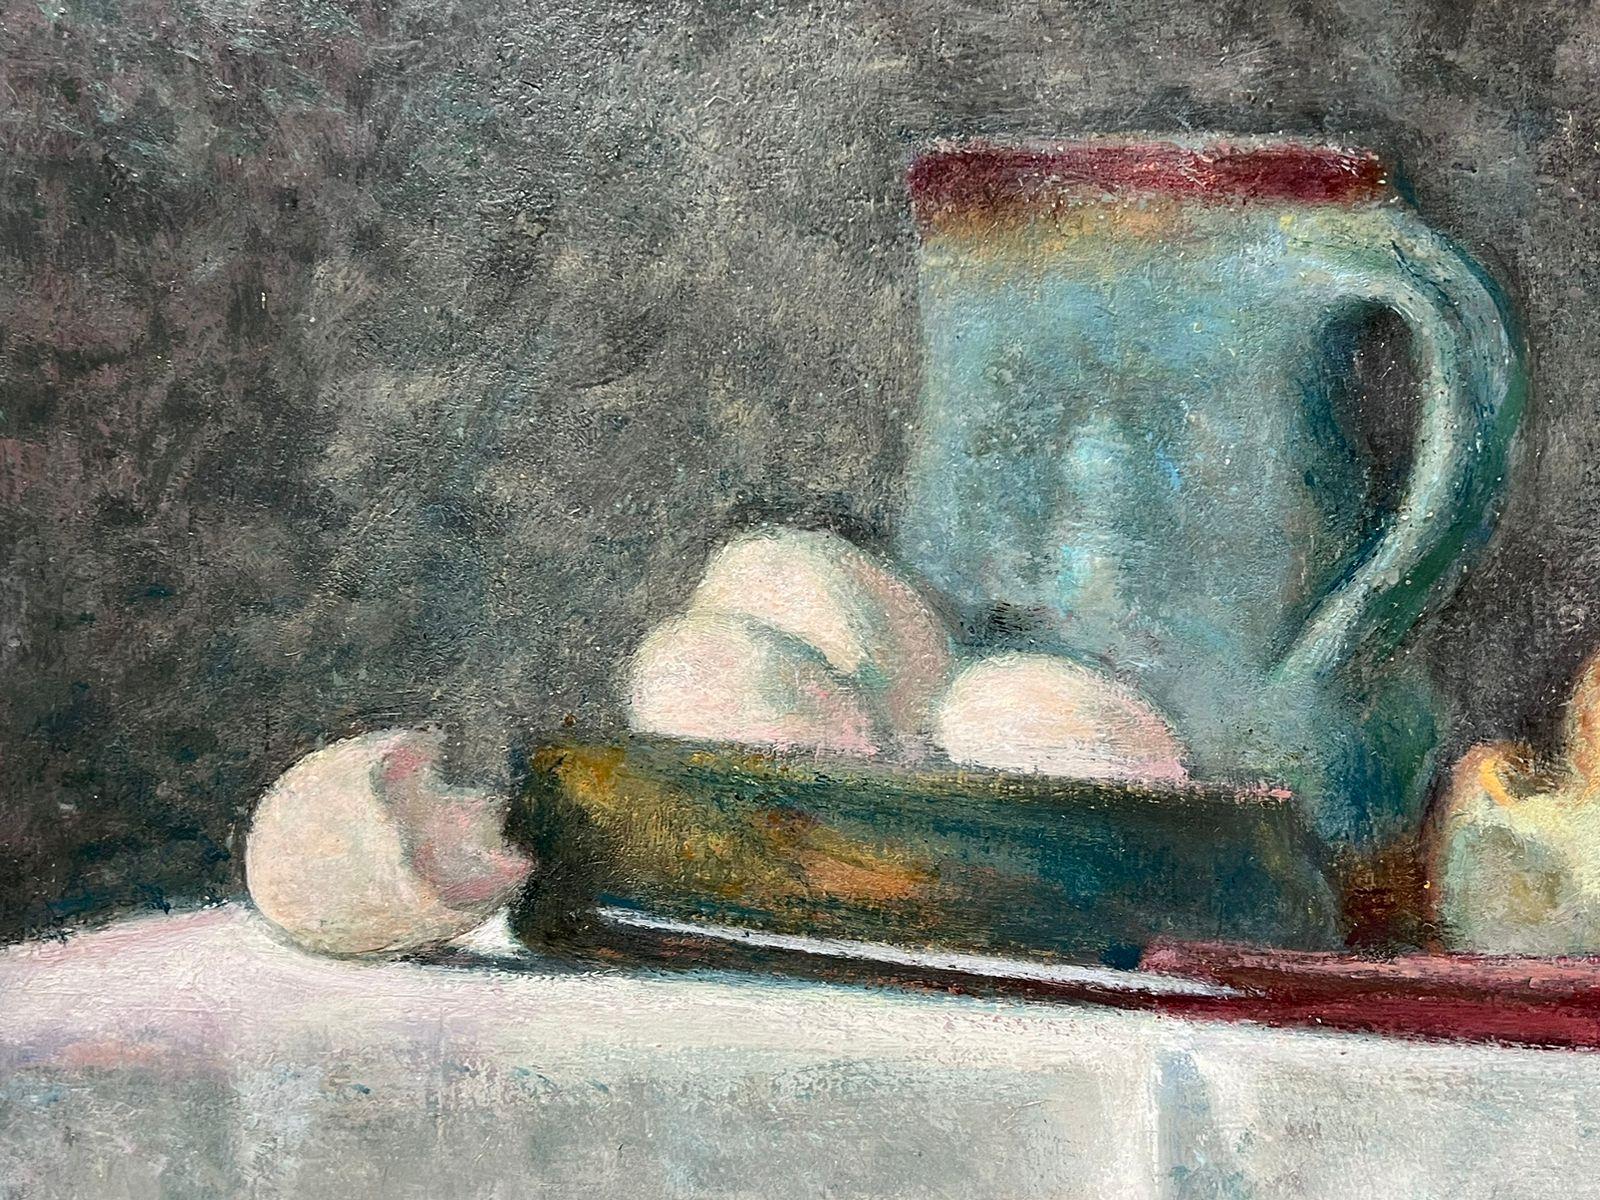 Still Life
by Jacob Markiel (Polish 1911-2008) *See notes signed below oil on board, unframed
board: 12 x 19 inches
provenance: the artists estate, south of France
condition: very good and sound condition

Jacob Markiel was born into a humble family